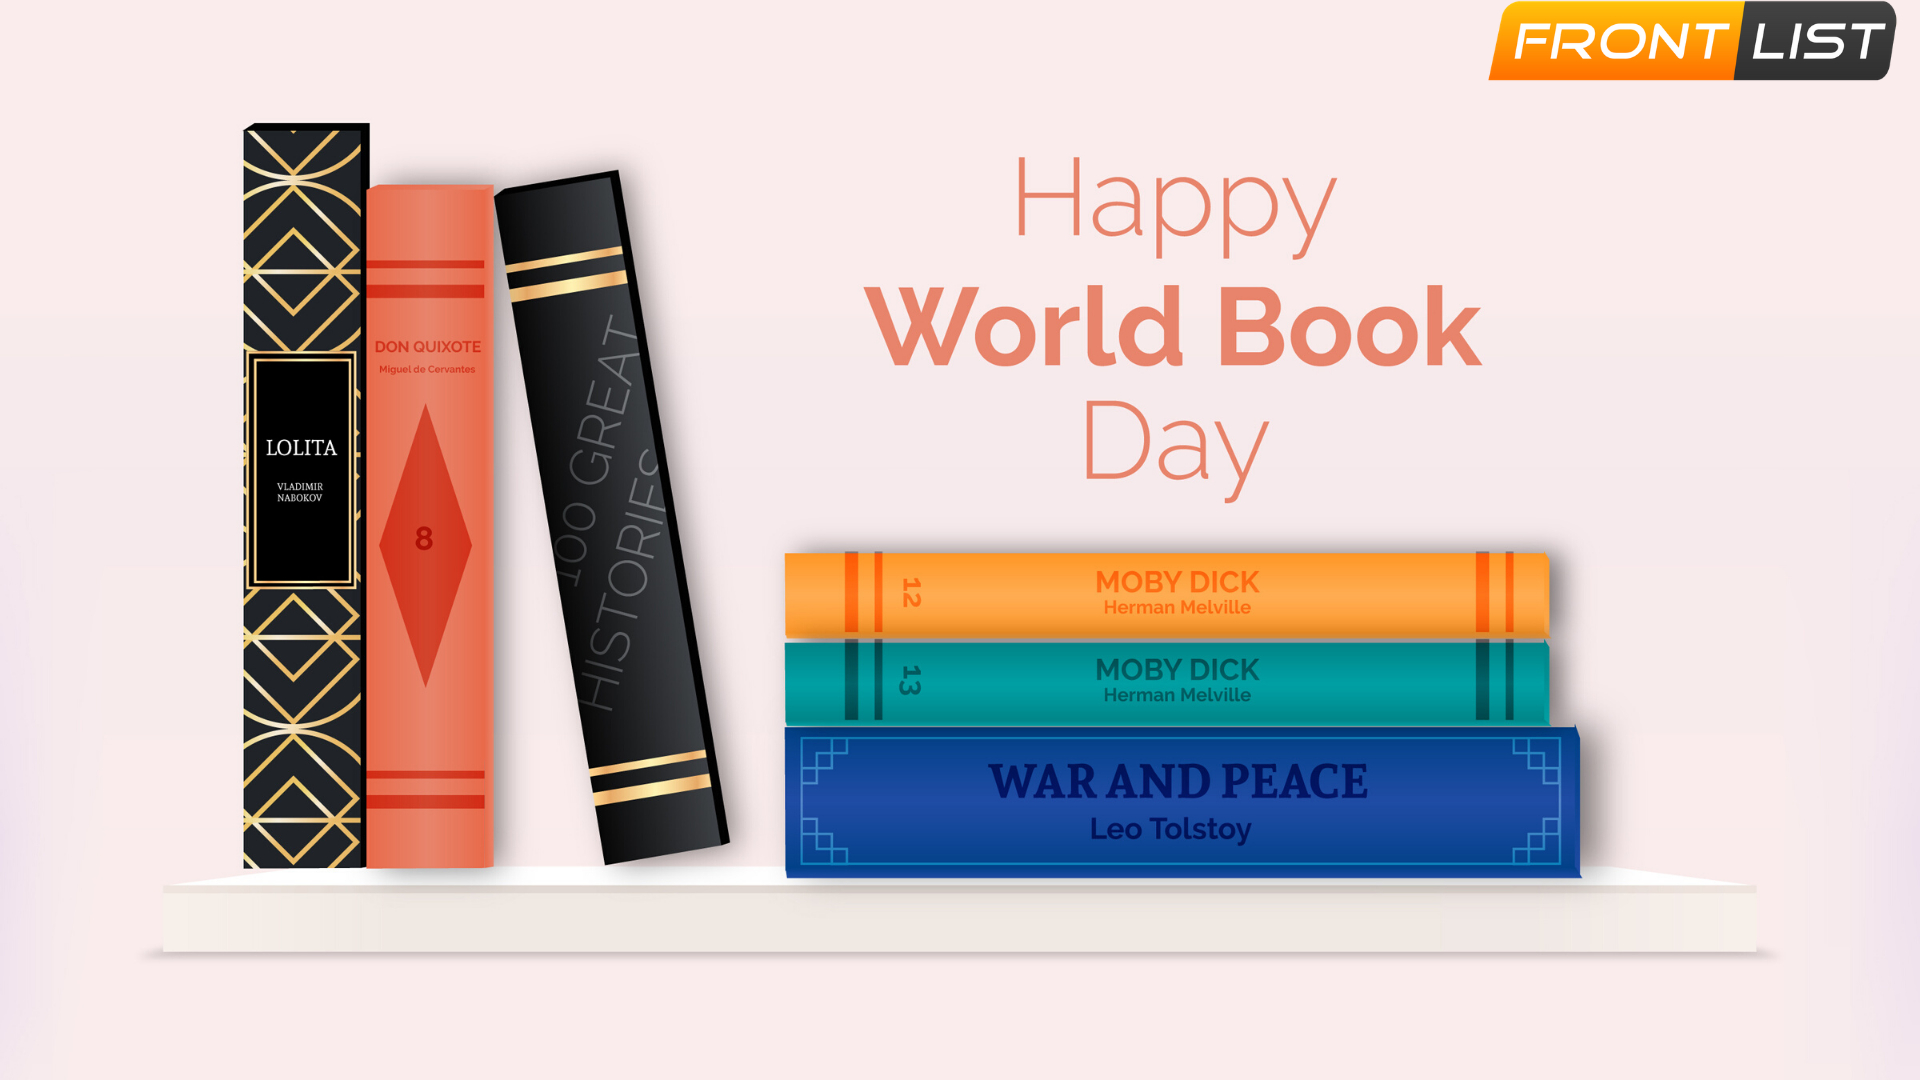 Celebrate your love for literature on this world book day!